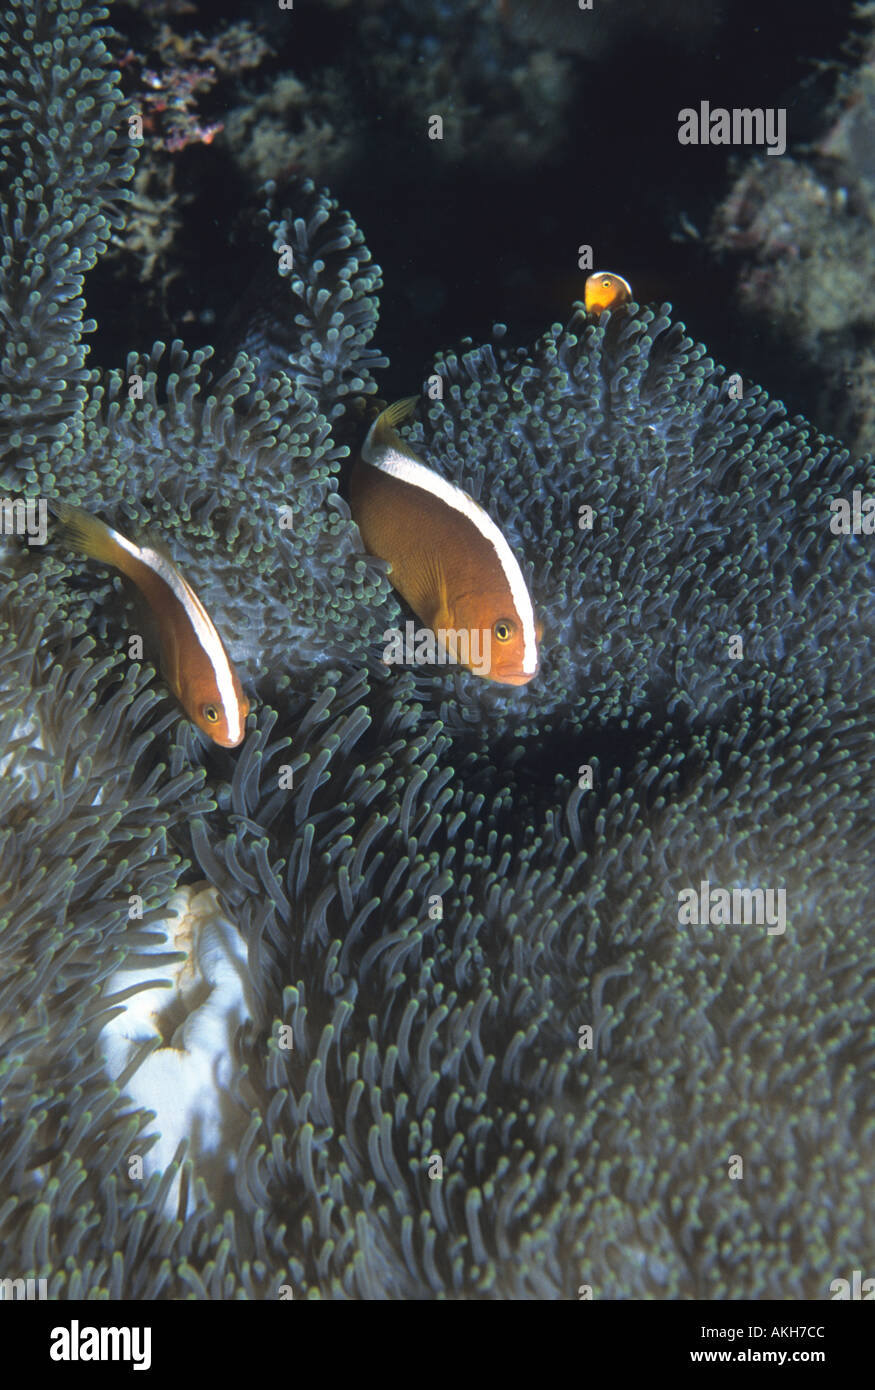 Two Skunk Anemonefish also called Skunk Clownfish Amphiprion sandaracinos in Heteractis crispa anemone north of Mike s Place Tan Stock Photo